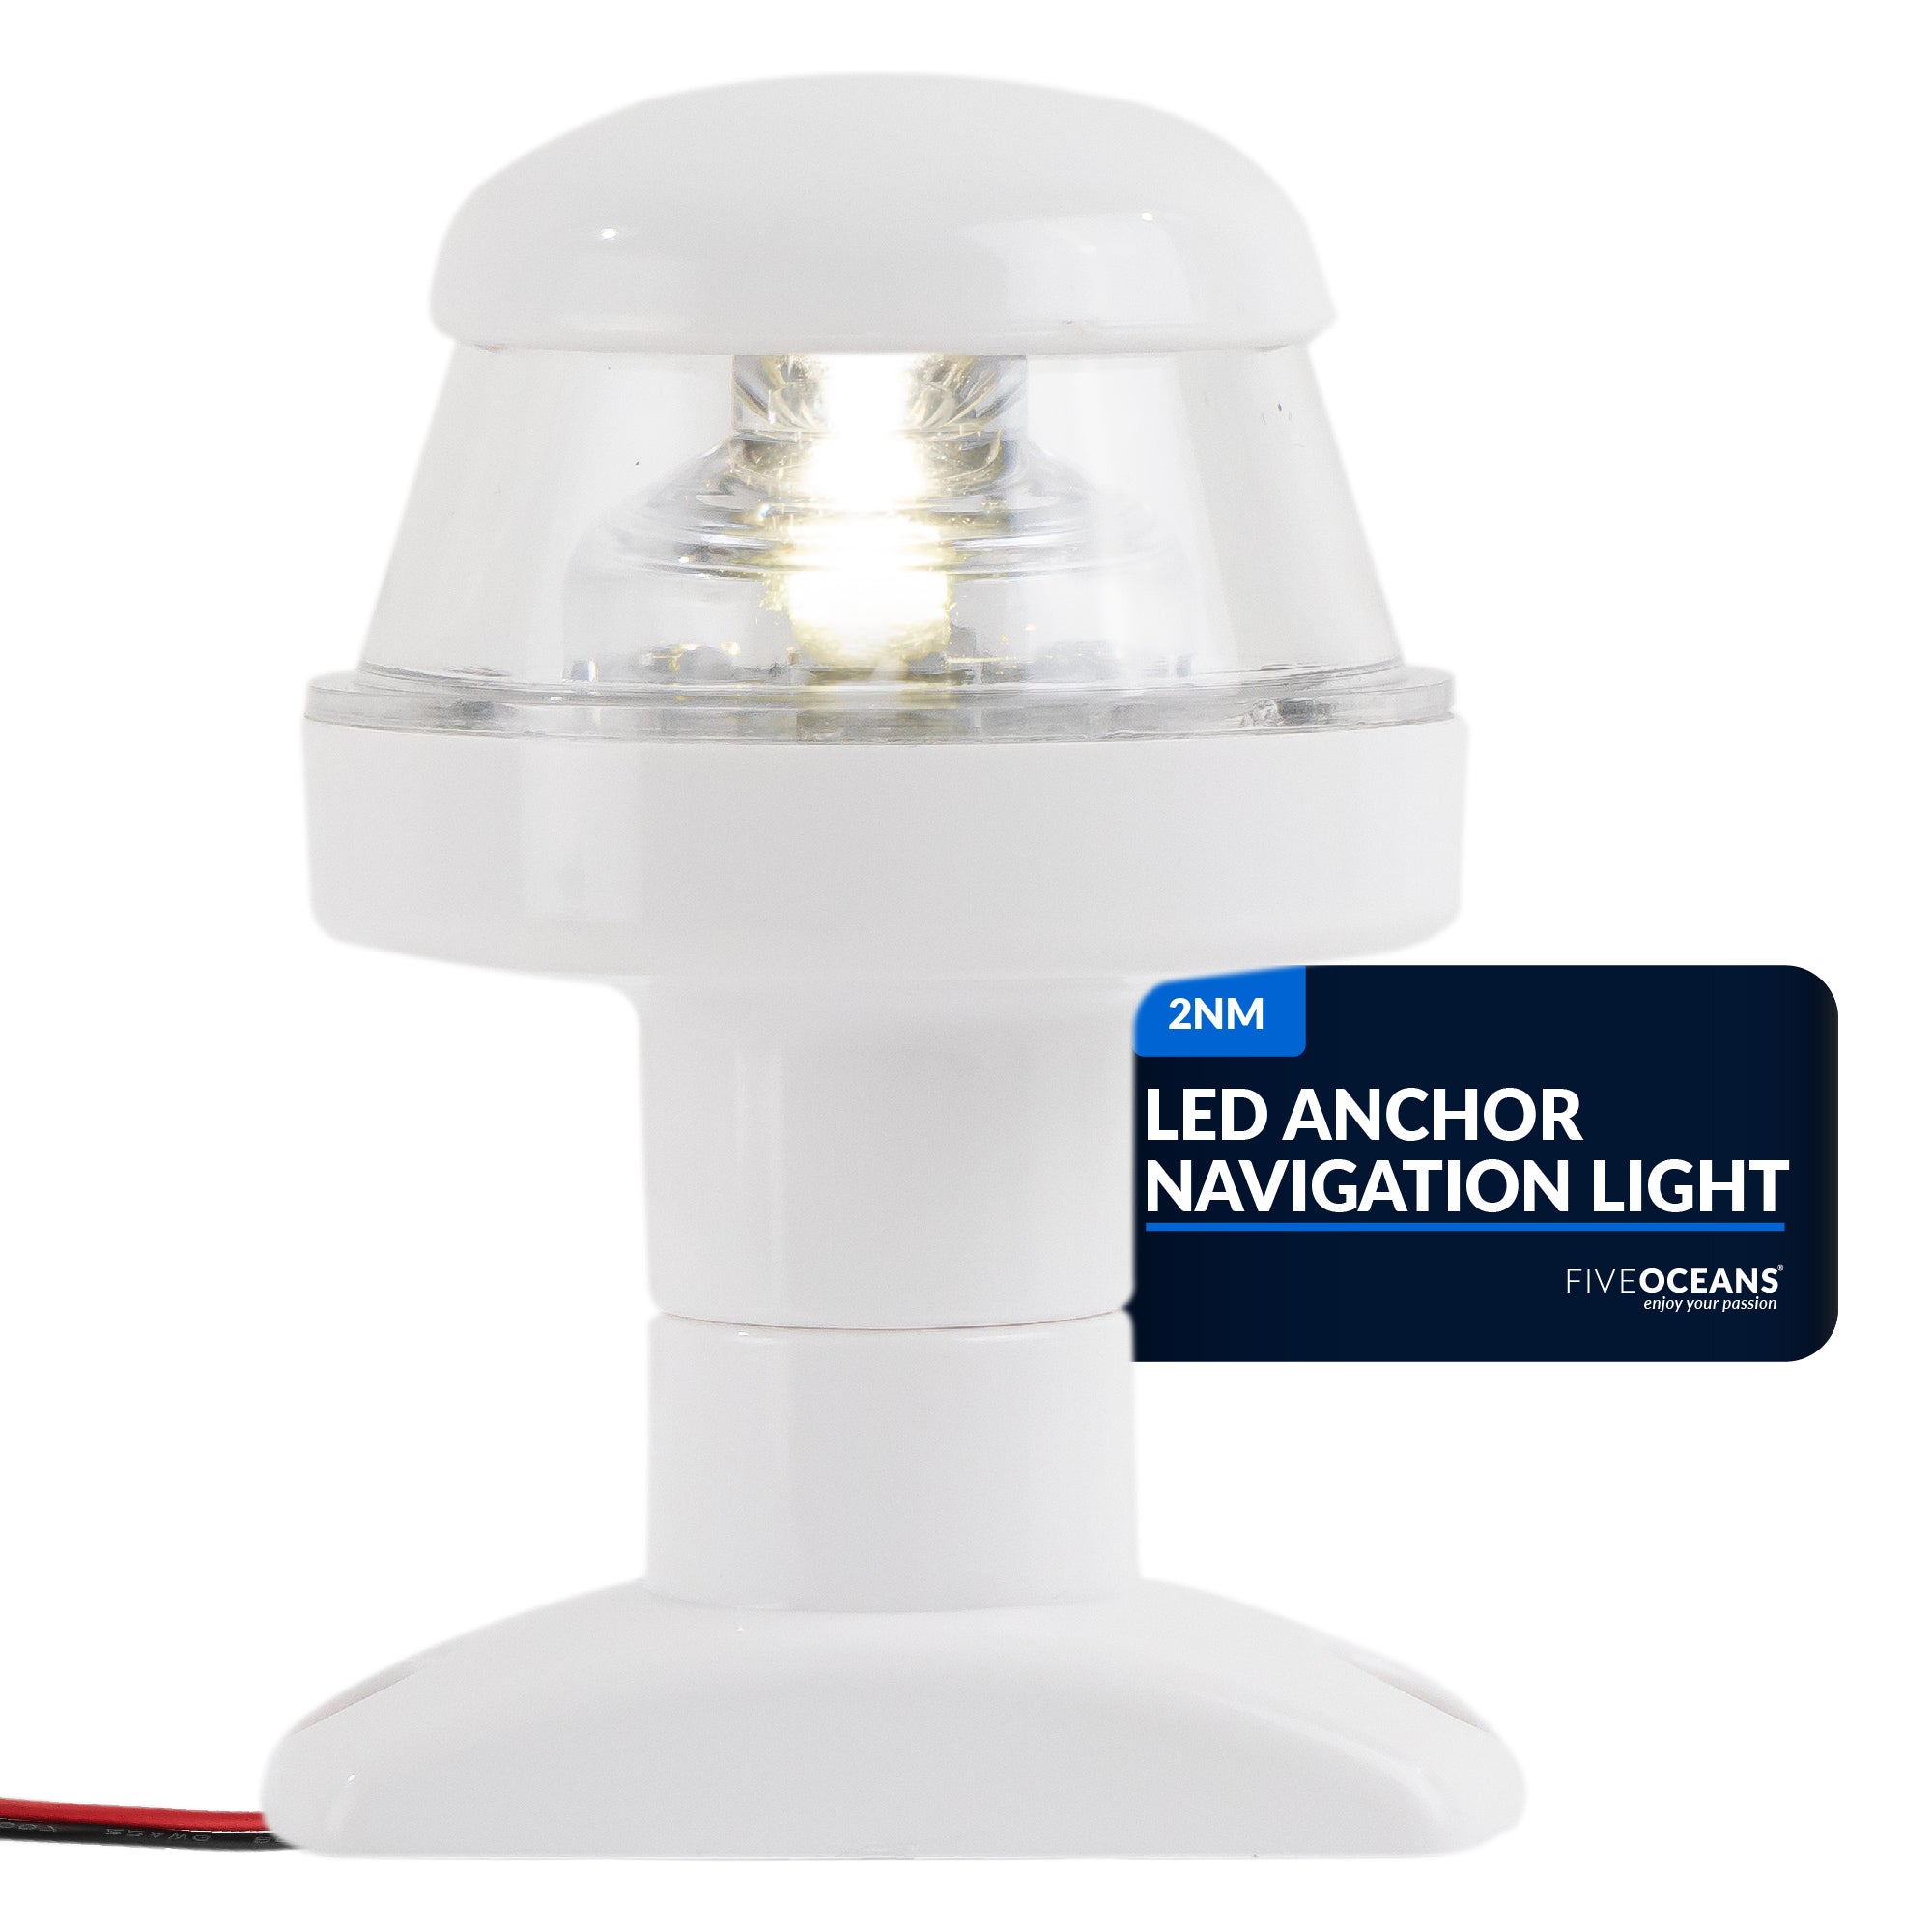 LED Anchor Navigation Light 3-1/4", Fixed Mount, 2NM - FO2312